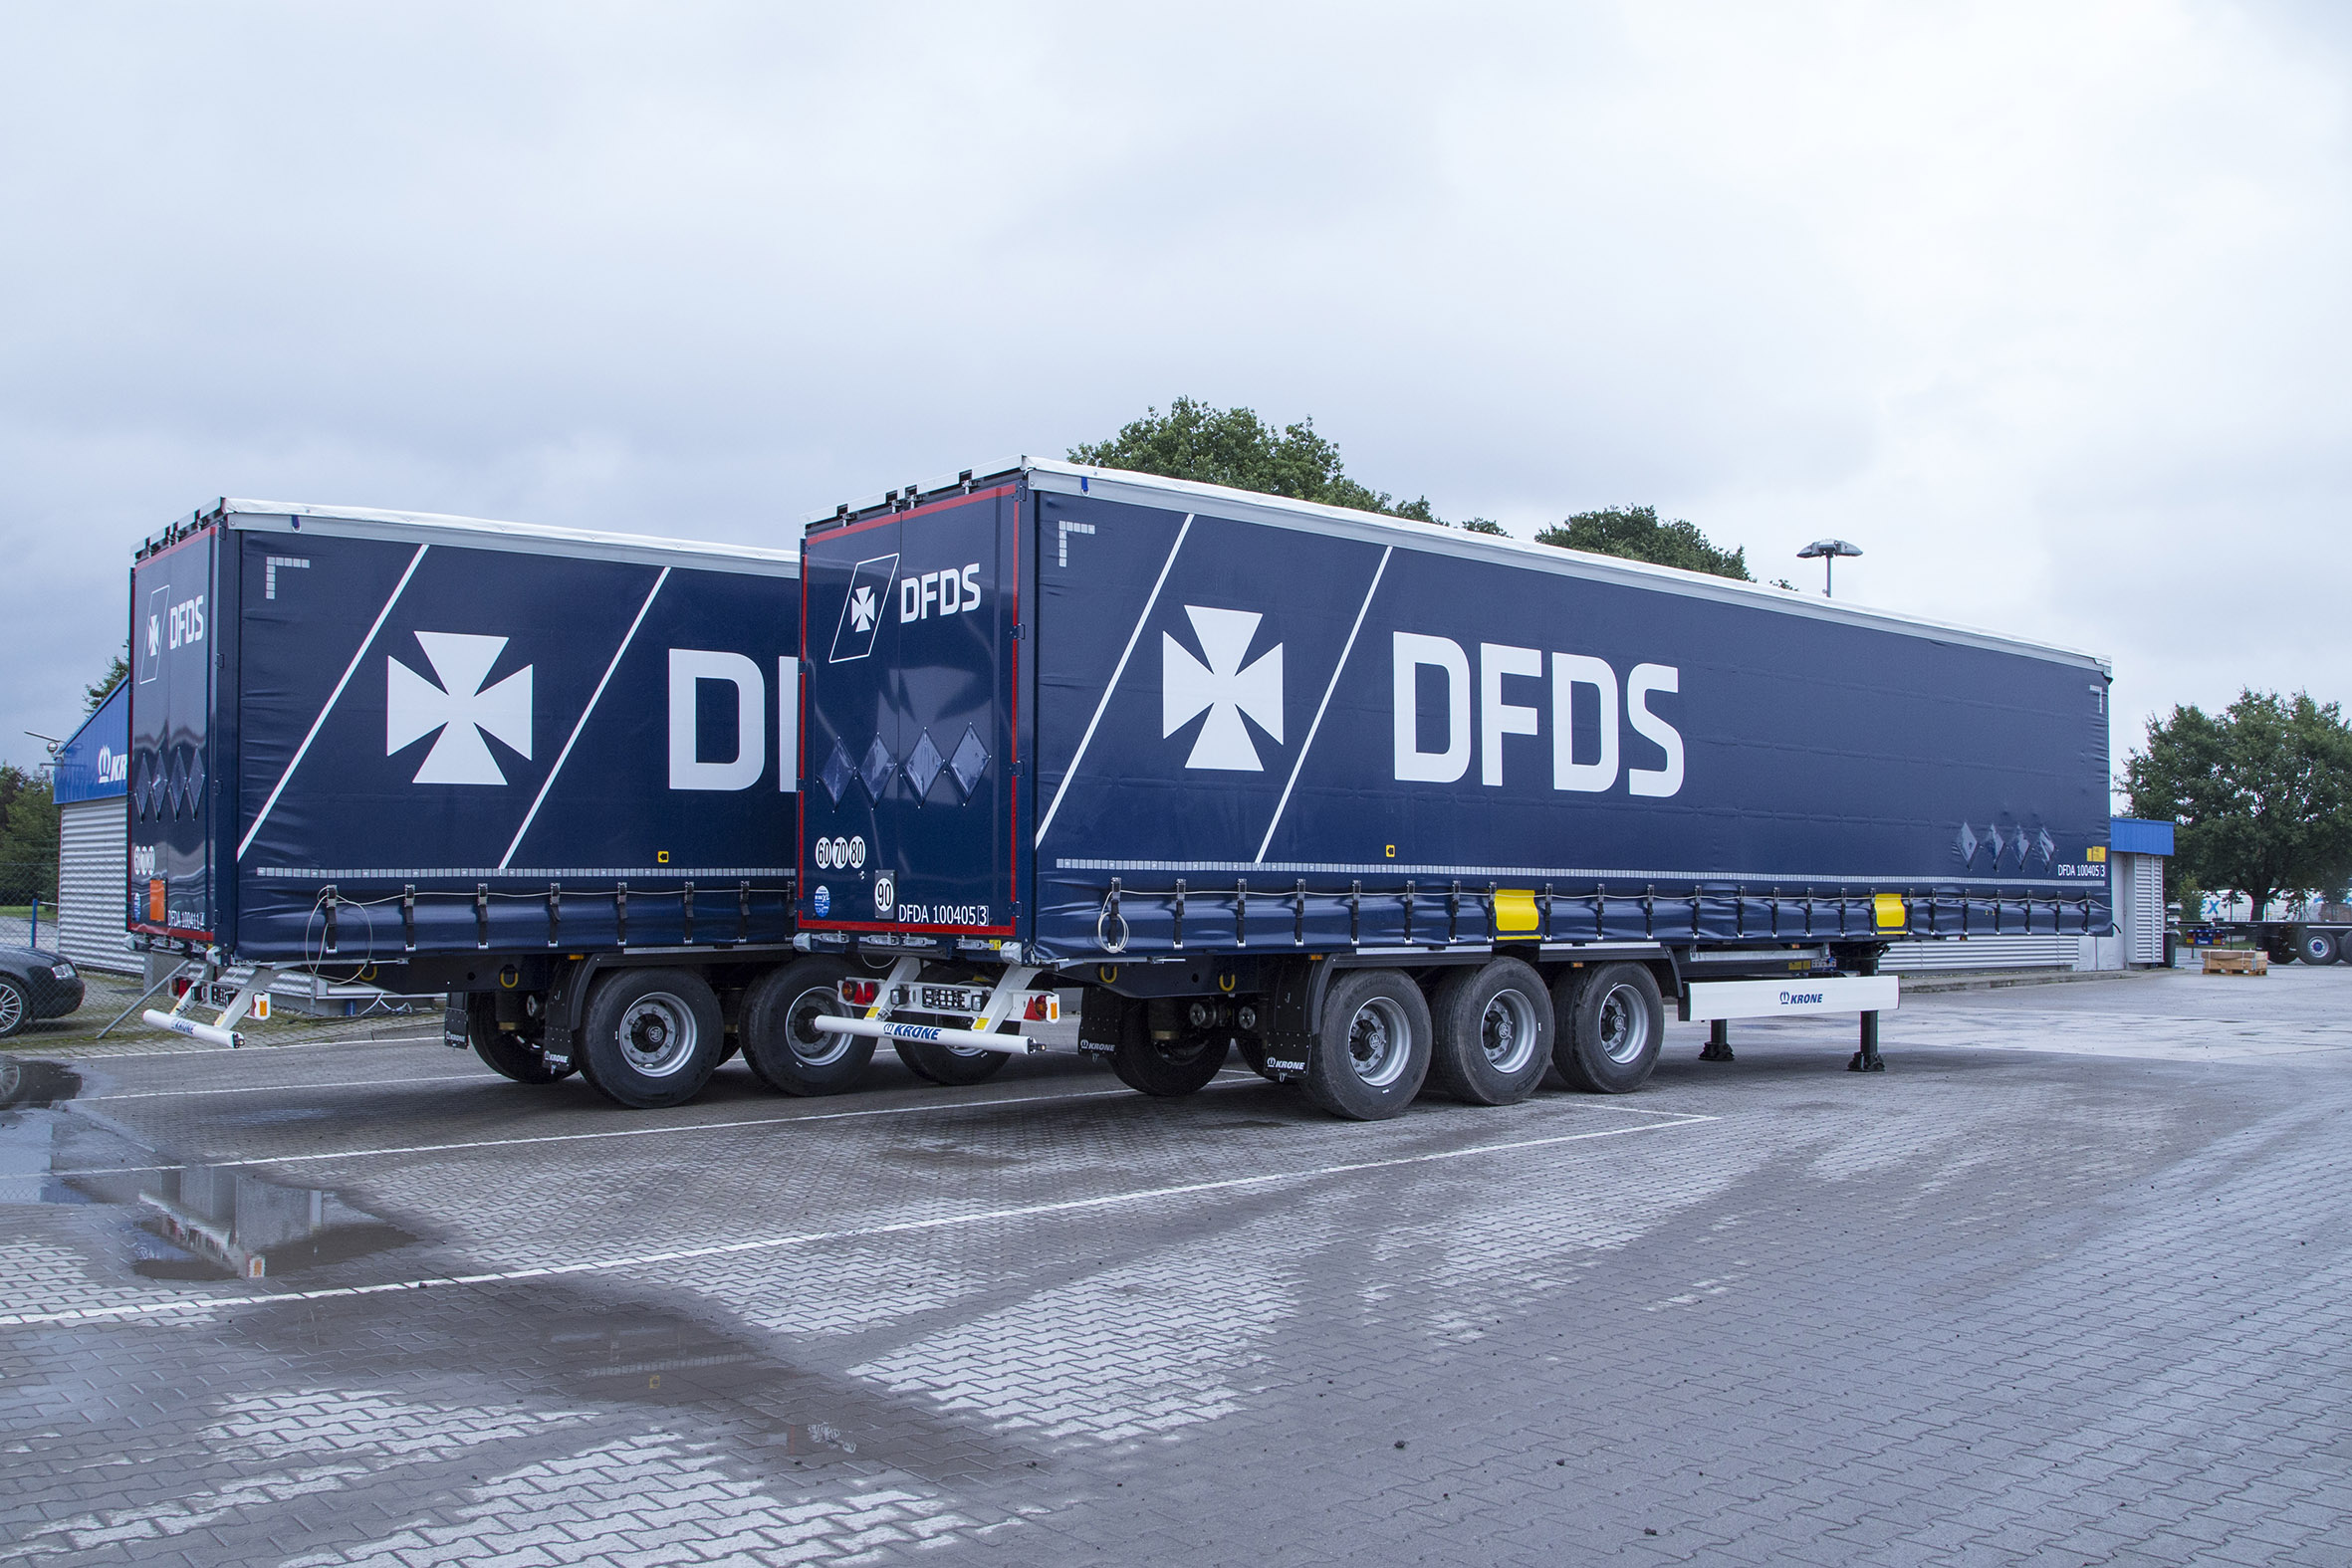 DFDS places its biggest trailer order ever